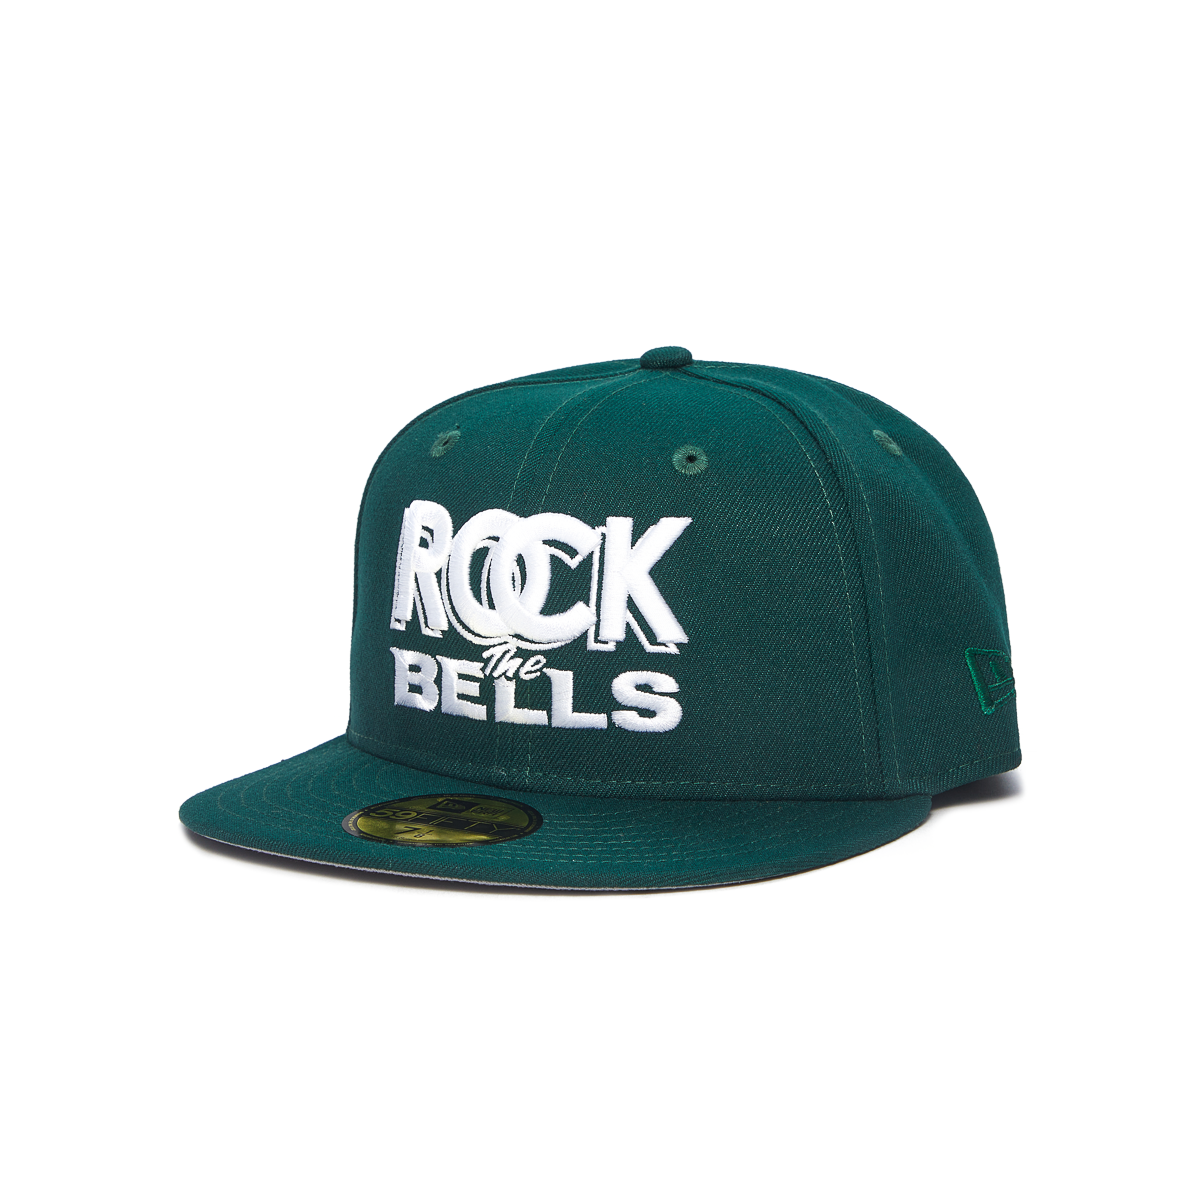 Rock The Bells x New Era 59FIFTY Fitted Hat / Dark Green